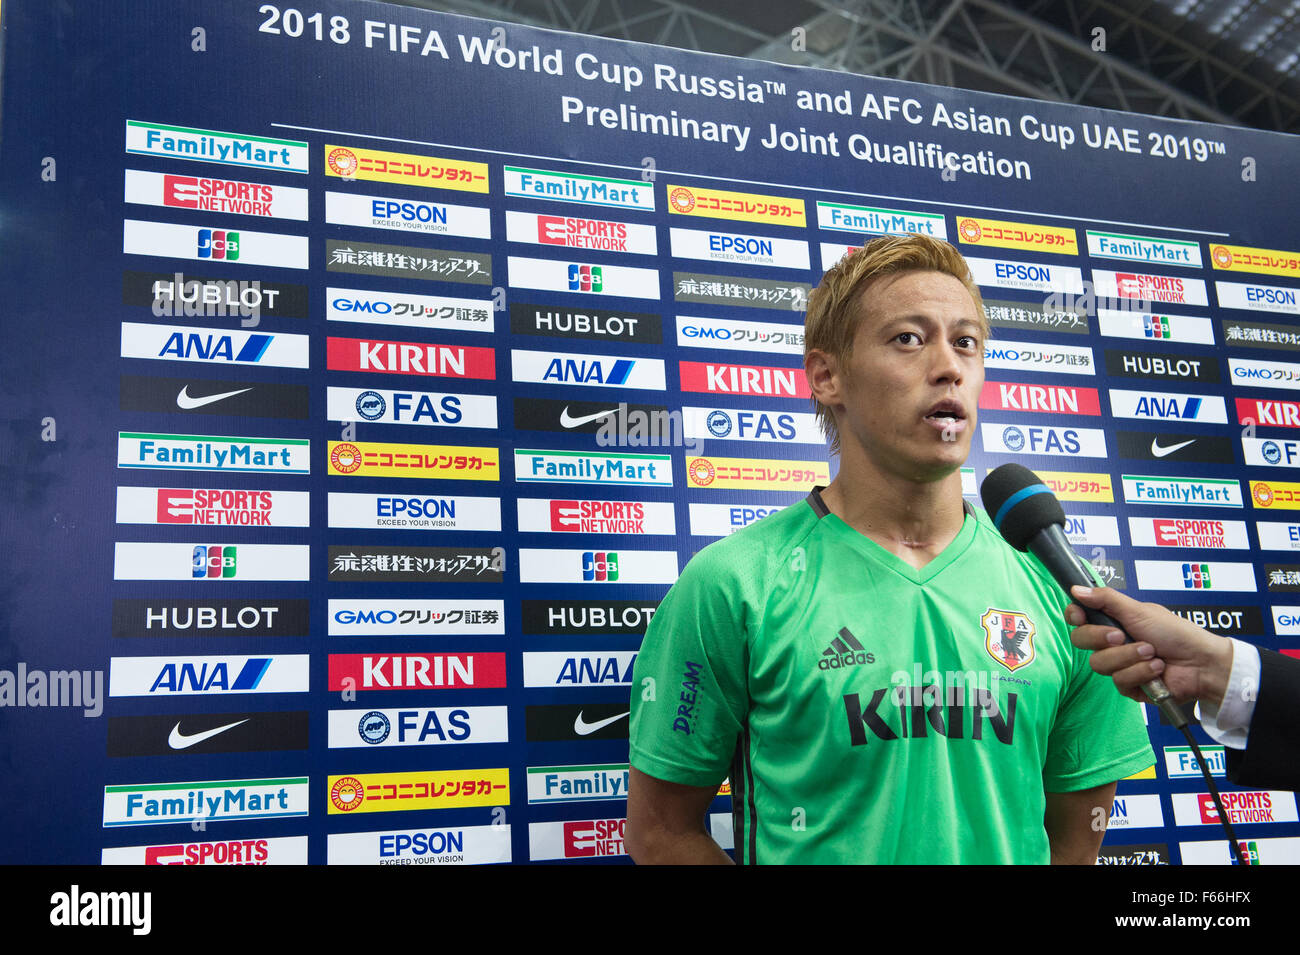 Honda Keisuke (JPN), during interview after the game Japan vs Singapore in the 2018 FIFA World Cup Russia Qualifiers Round 2 - Group E at the Sports Hub Stadium on 12 Nov 2015 in Singapore. Japan beat Singapore 3-0. (Photo by Haruhiko Otsuka/Nippon News & Aflo) Stock Photo